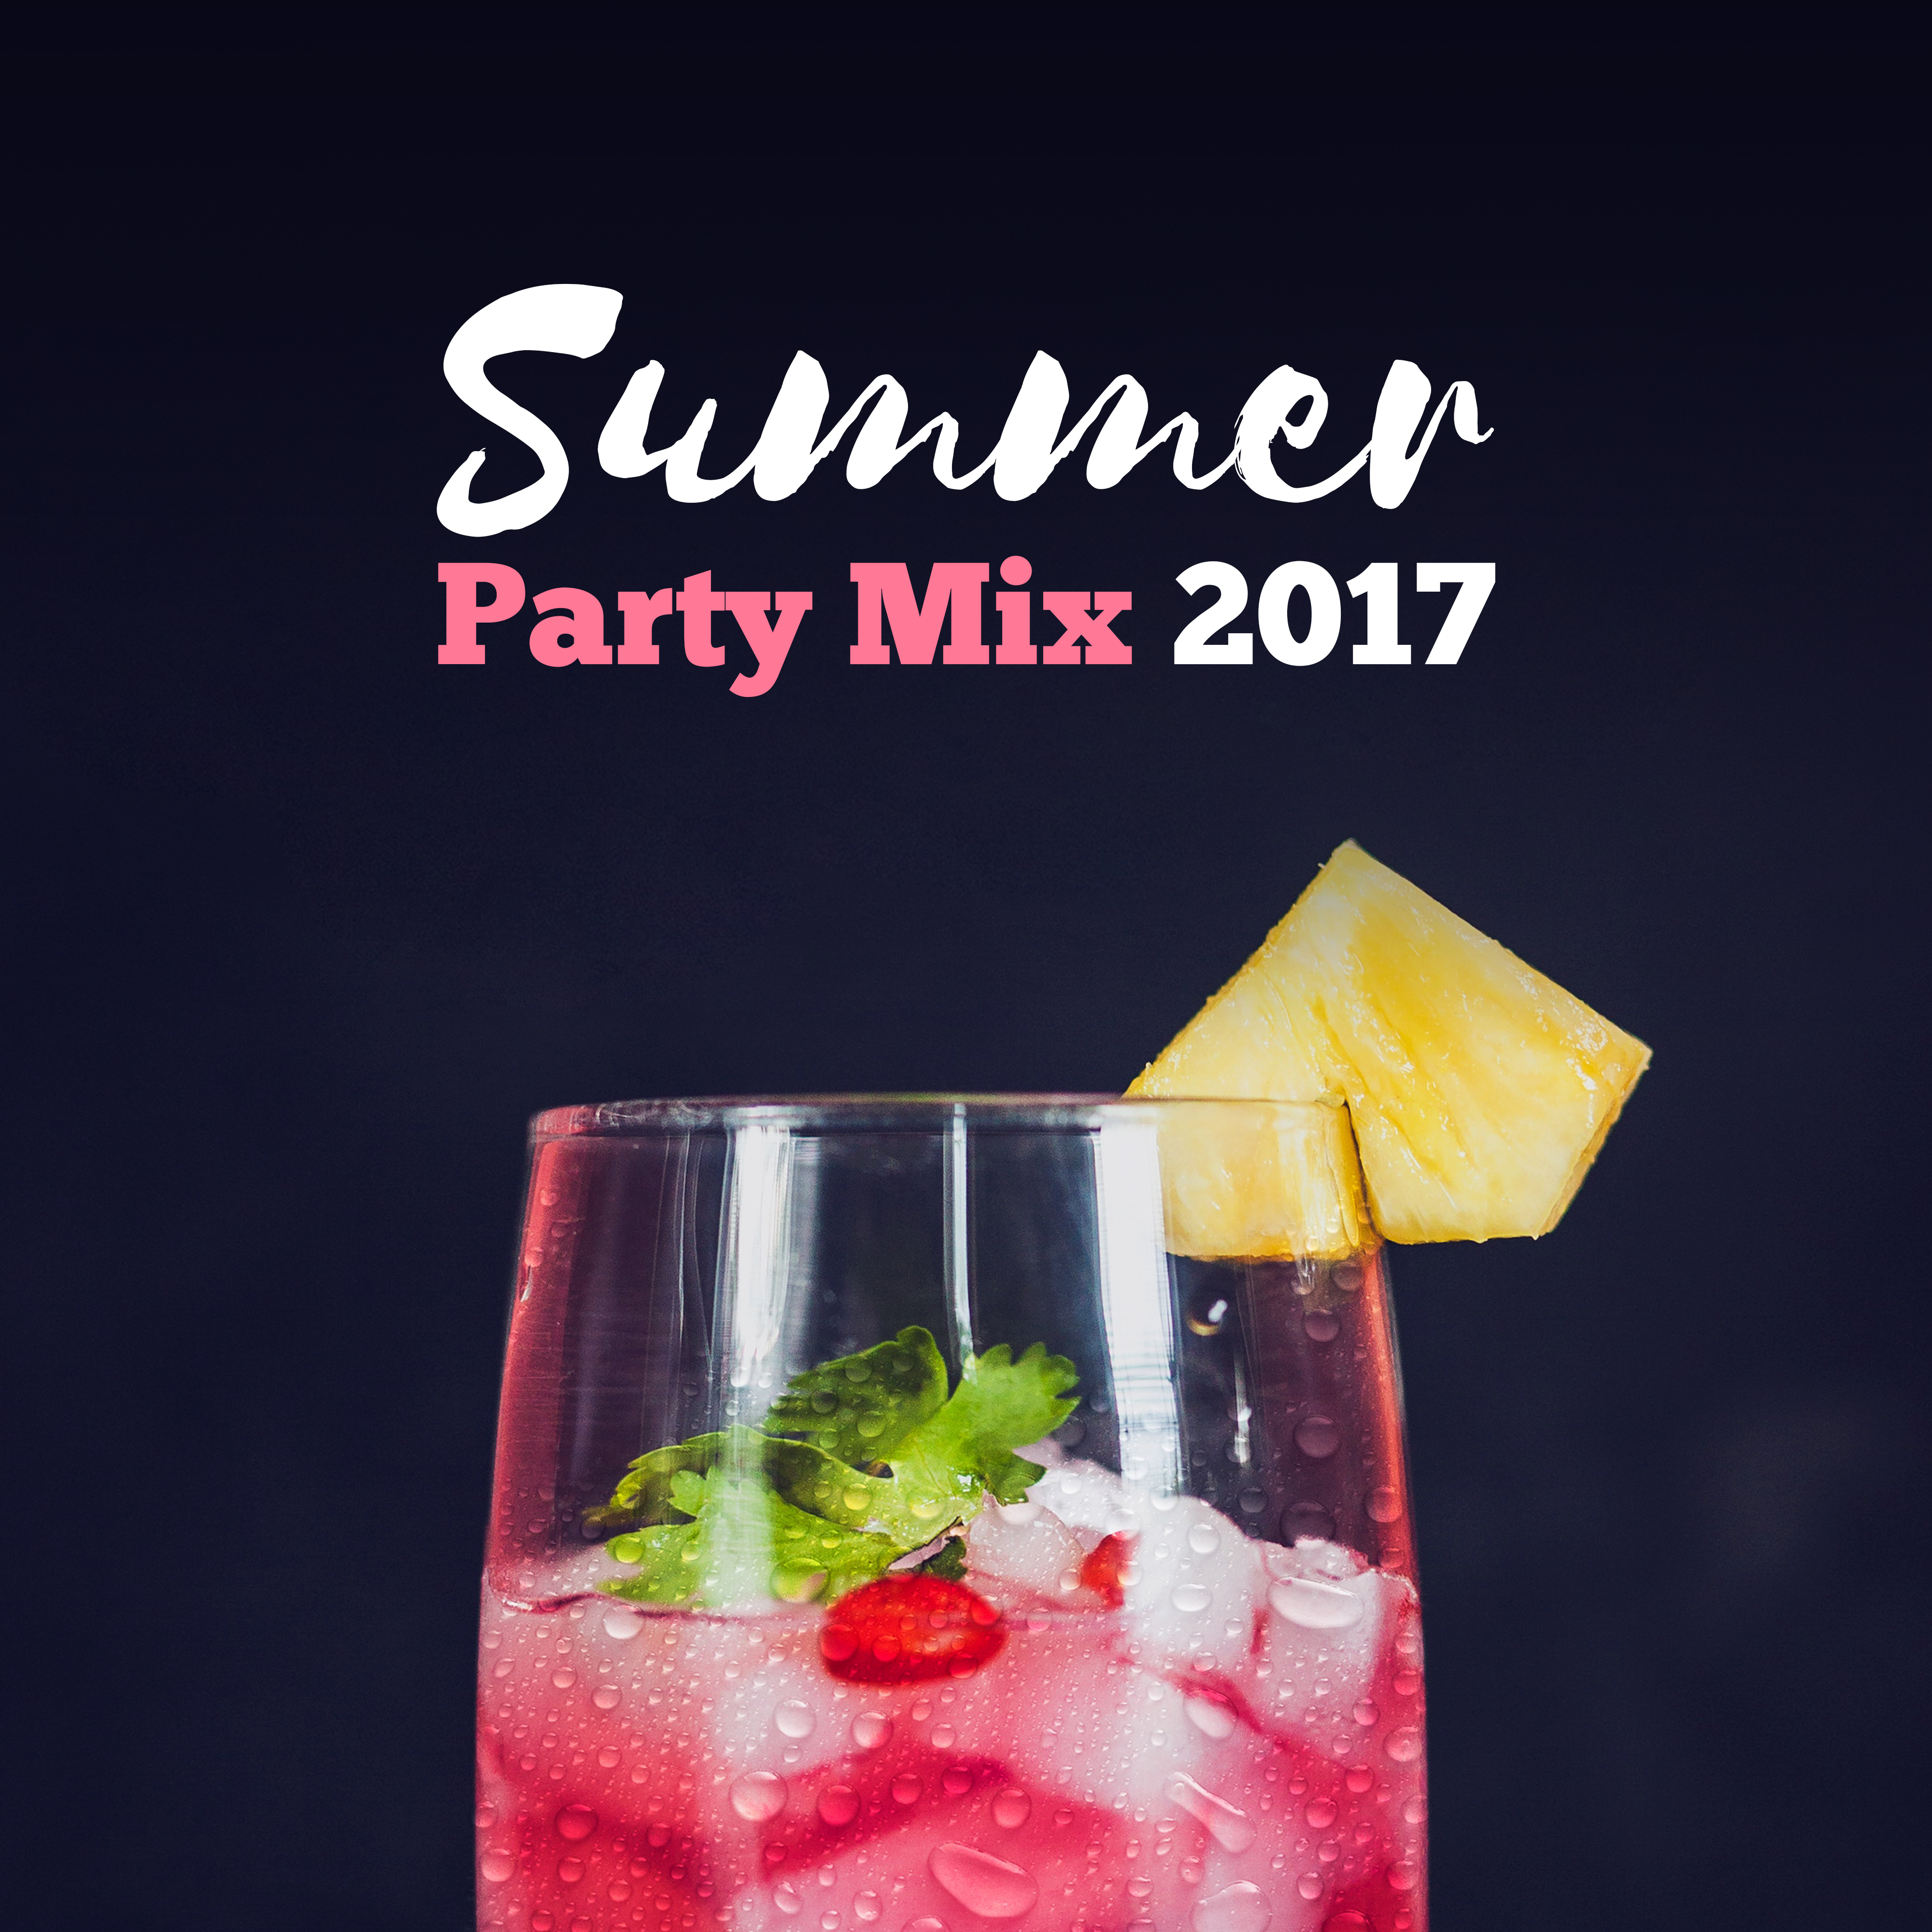 Summer Party Mix 2017  Chillout Music, Deep Beats, Party Hits, Ambient Lounge, Ibiza Dance